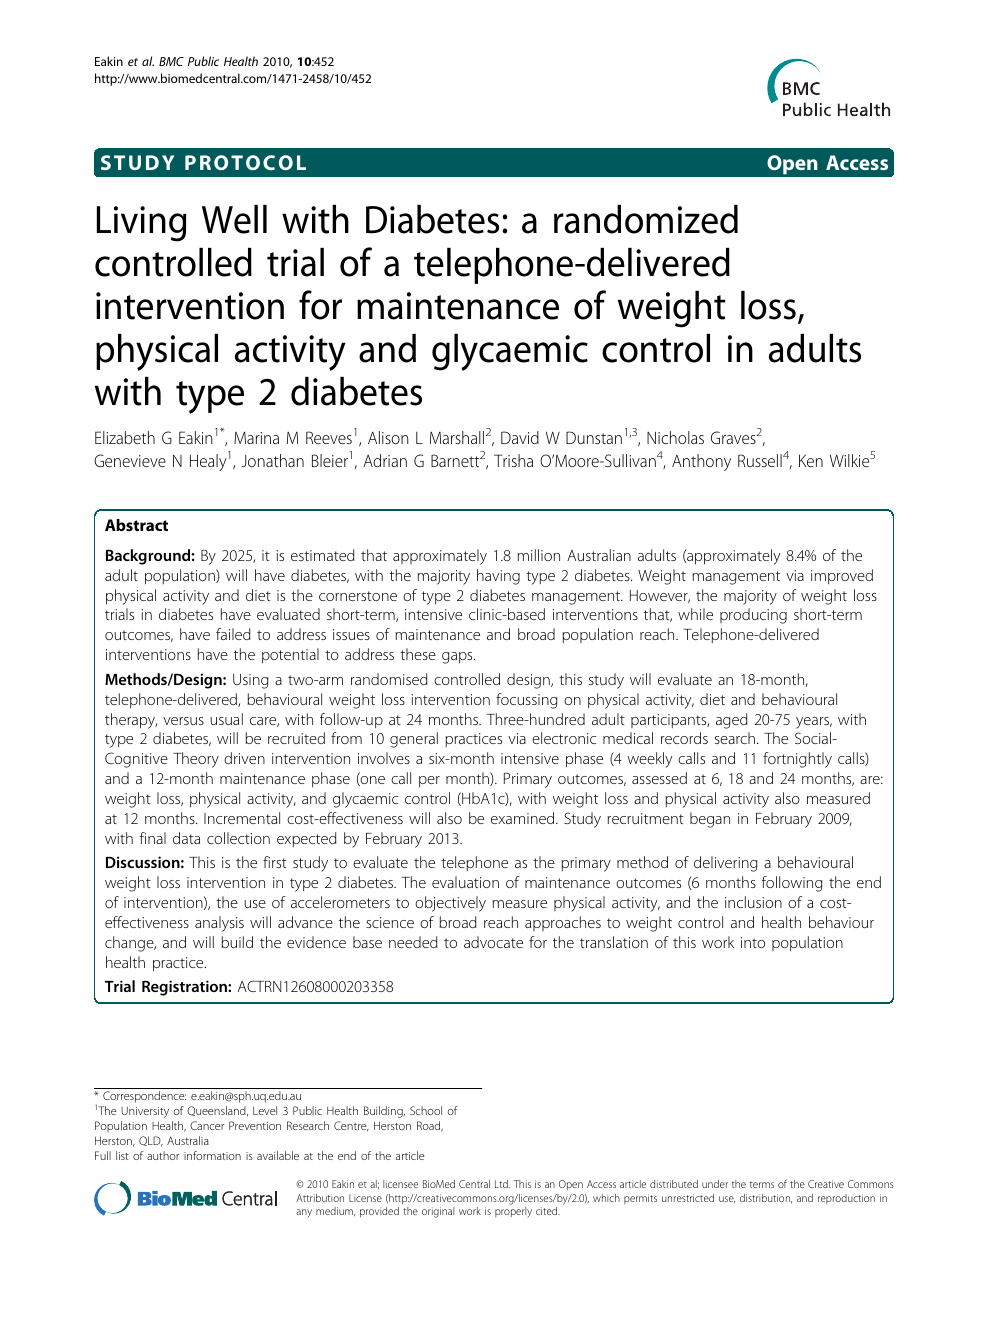 Living Well With Diabetes A Randomized Controlled Trial Of A Telephone Delivered Intervention For Maintenance Of Weight Loss Physical Activity And Glycaemic Control In Adults With Type 2 Diabetes Topic Of Research